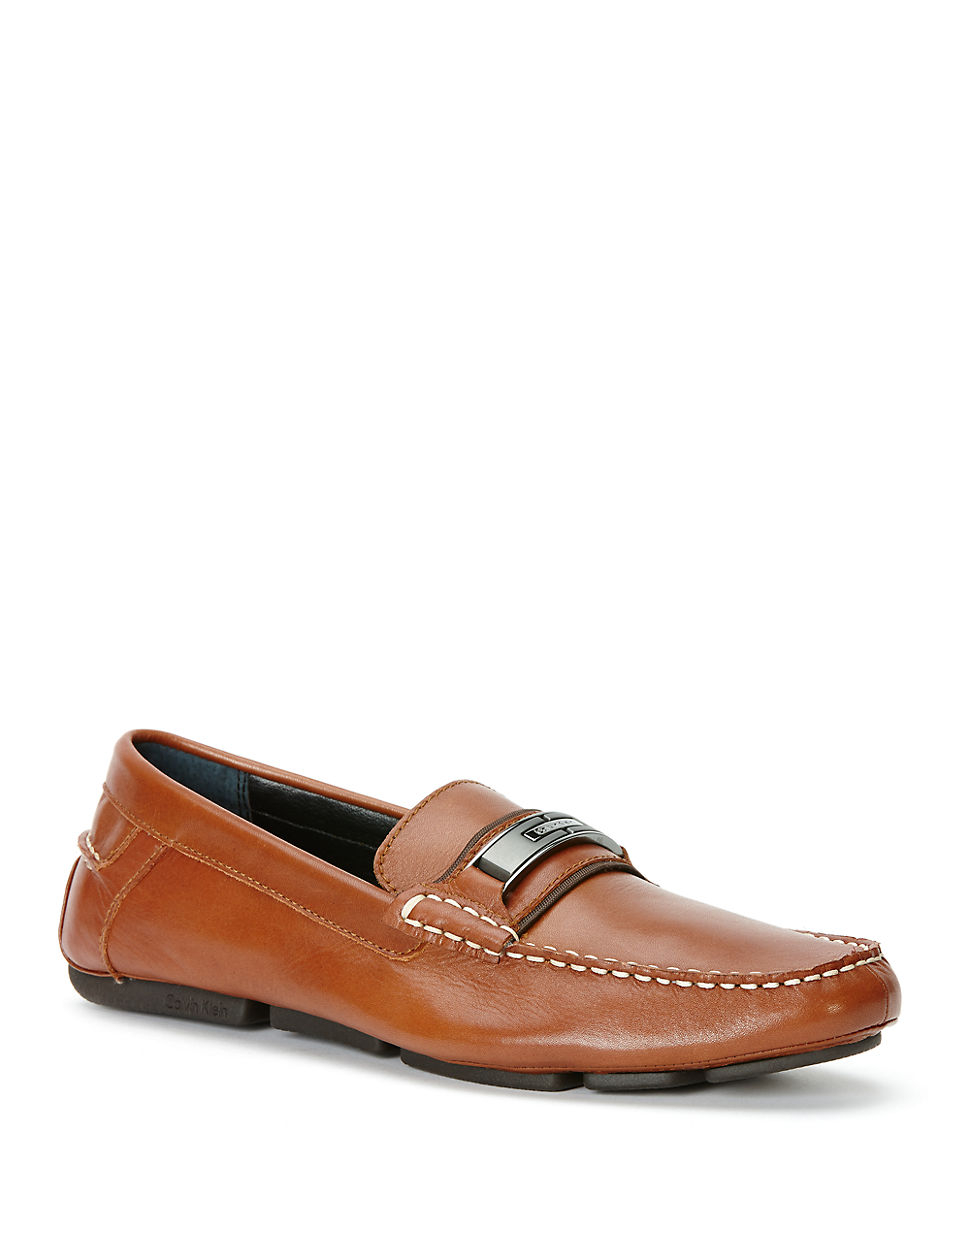 Lyst - Calvin klein Mchale Loafers in Brown for Men